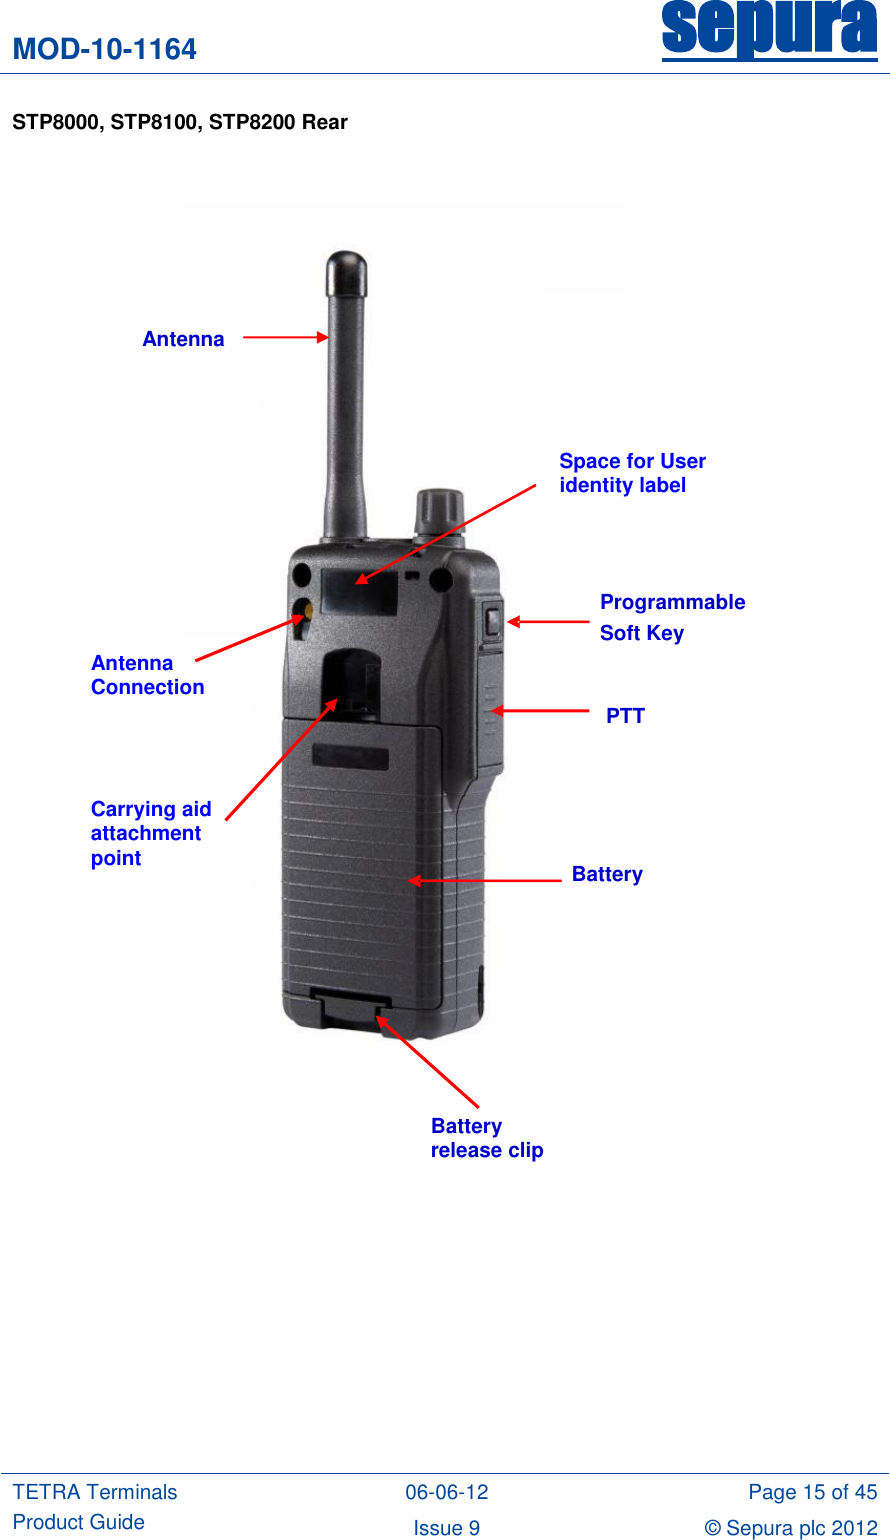 MOD-10-1164 sepura  TETRA Terminals Product Guide 06-06-12 Page 15 of 45 Issue 9 © Sepura plc 2012   STP8000, STP8100, STP8200 Rear          Antenna   PTT Programmable  Soft Key Battery Battery release clip Antenna Connection Carrying aid attachment point Space for User identity label 